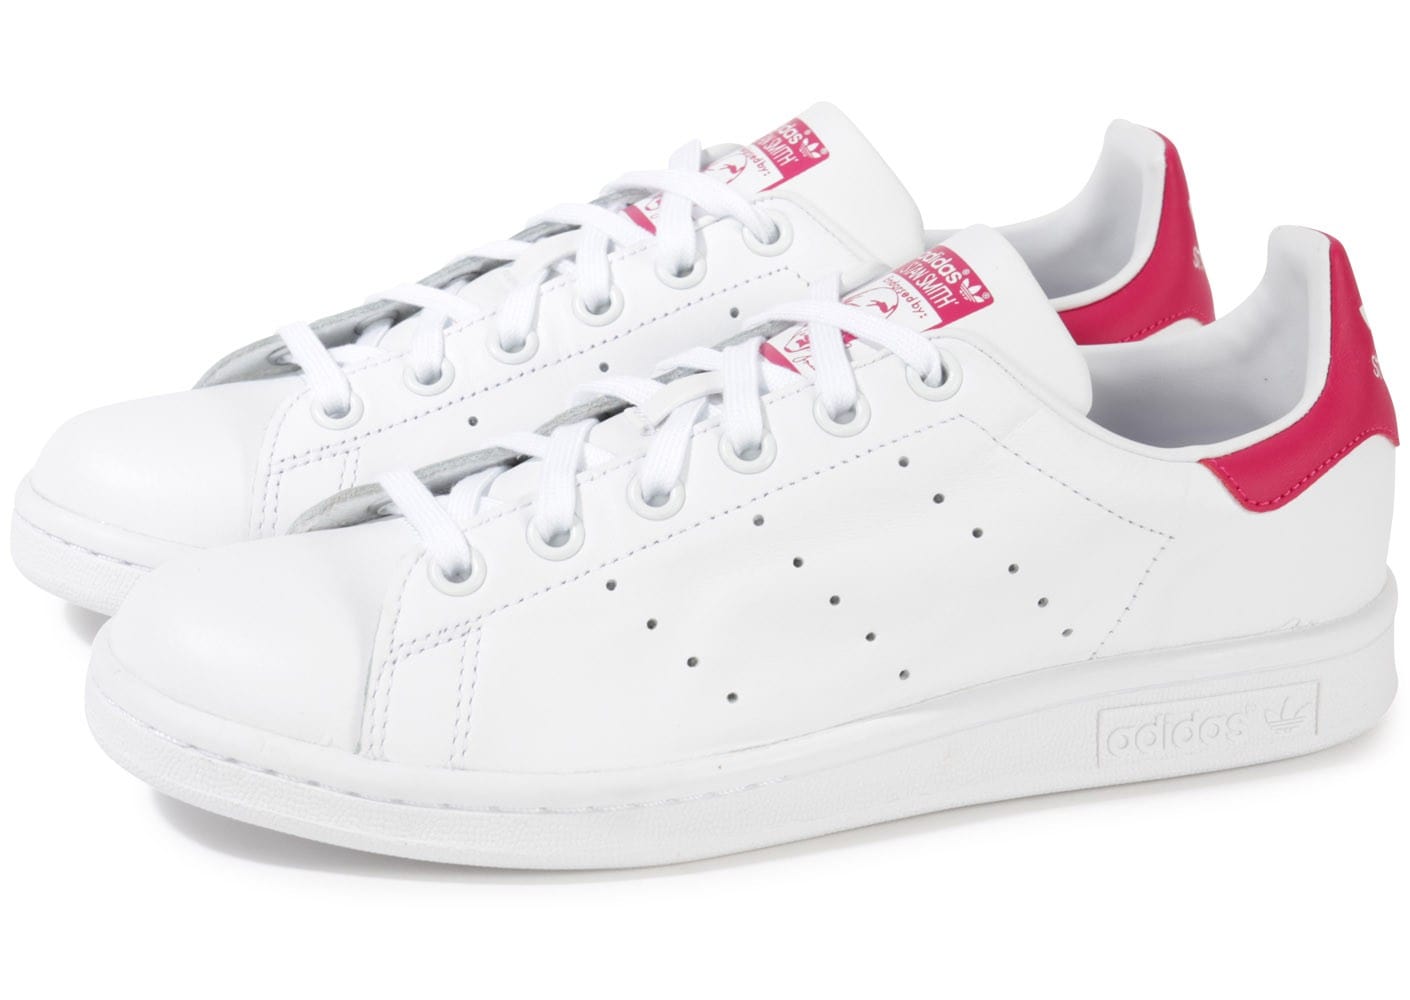 chaussures adidas femme blanche et rose